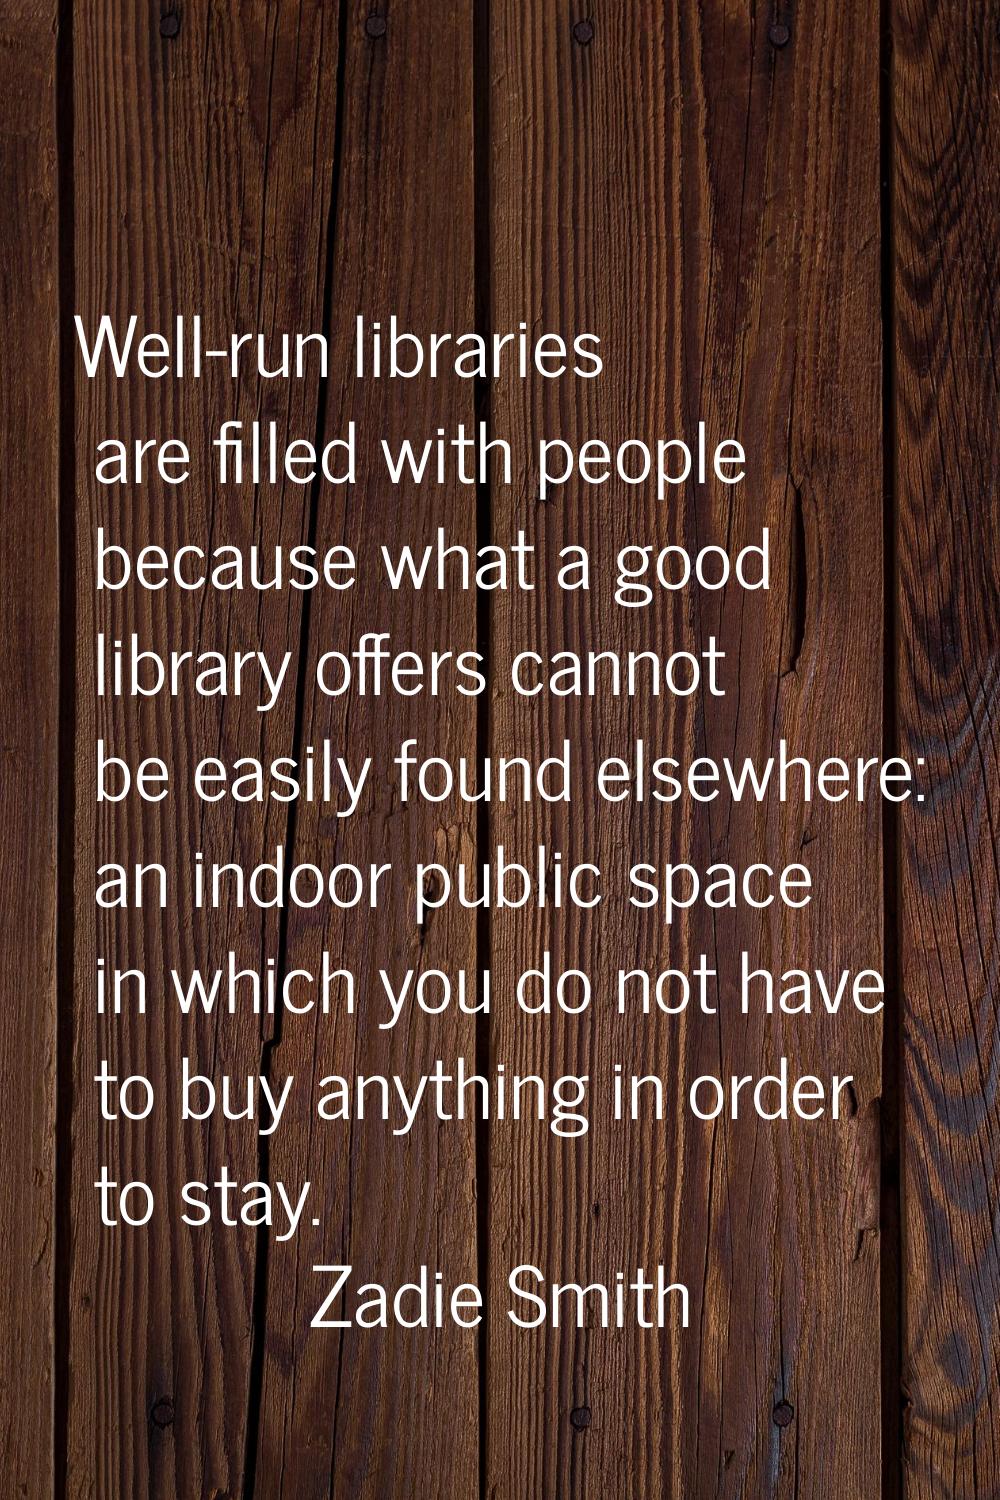 Well-run libraries are filled with people because what a good library offers cannot be easily found